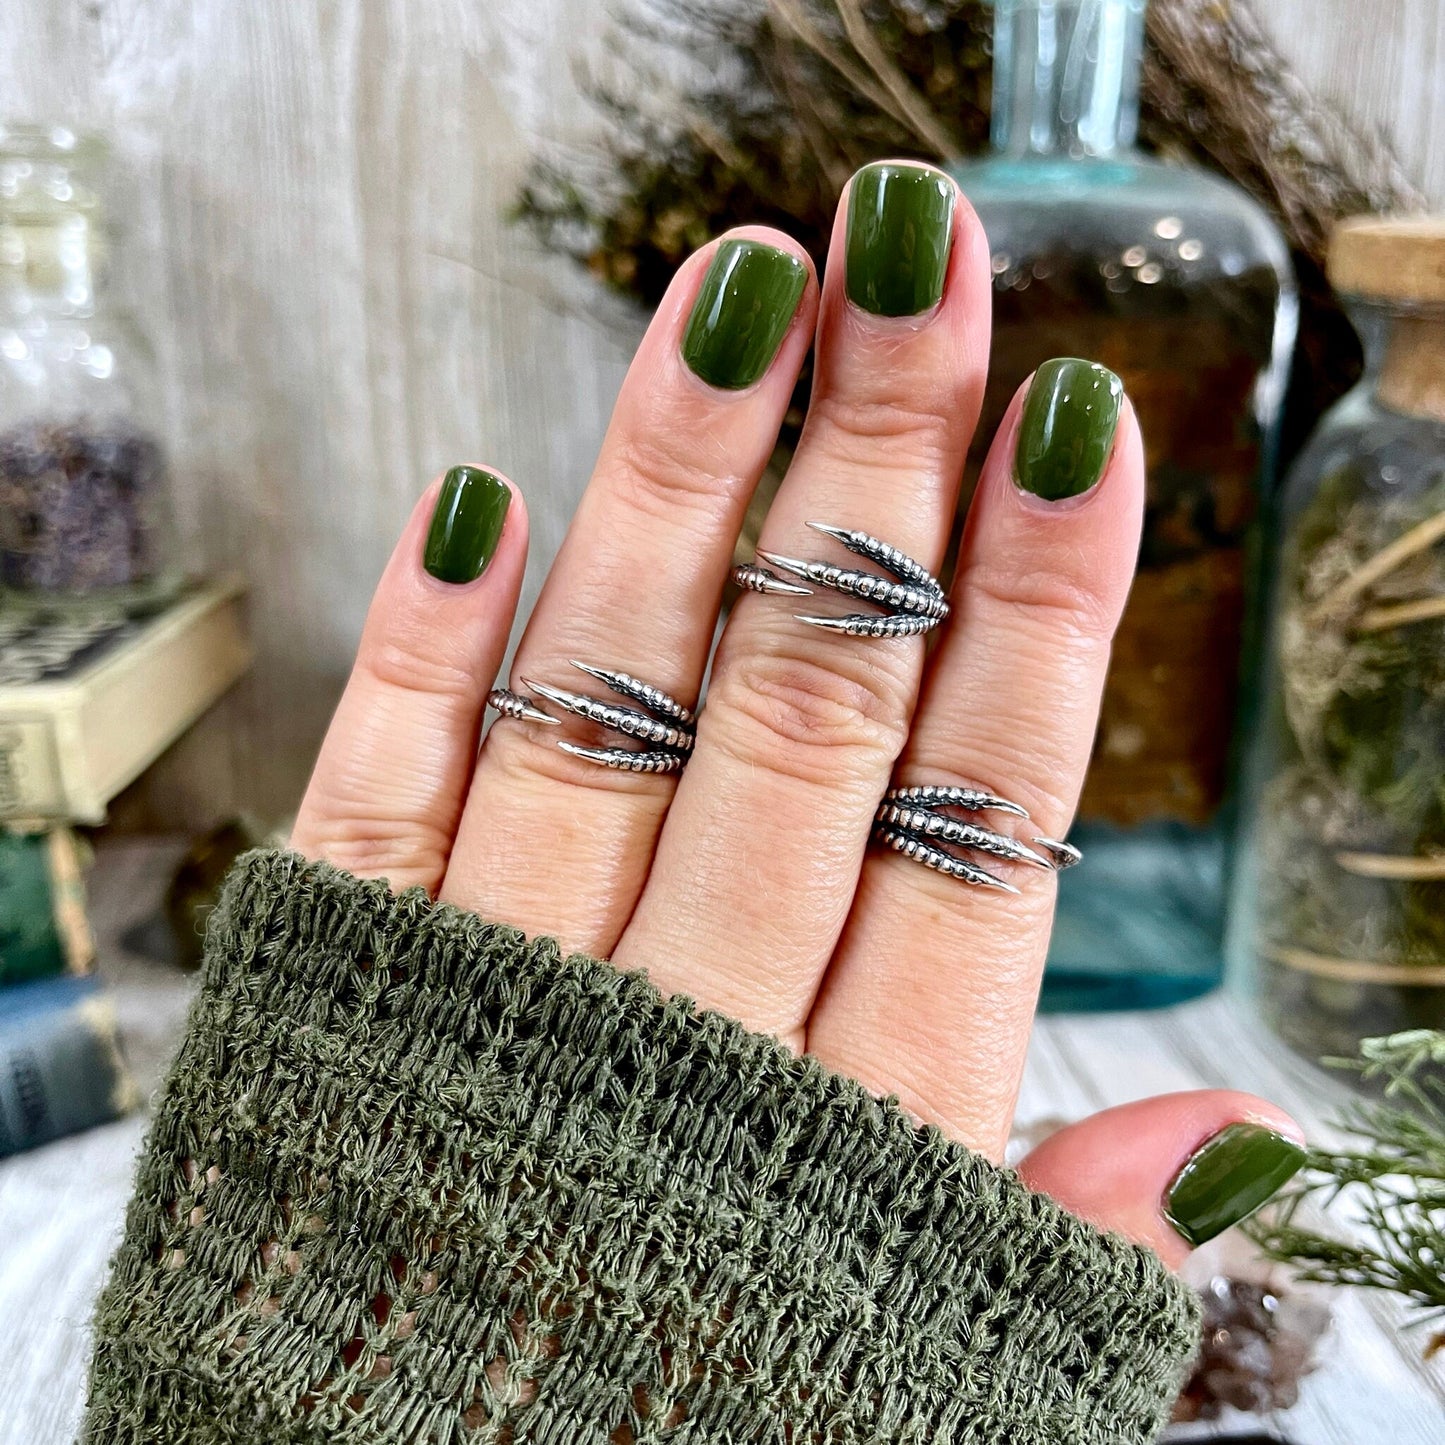 925, Adjustable Ring, Bird Claw Ring, Bohemian Ring, boho jewelry, boho ring, Etsy ID: 1136998367, Festival Jewelry, Goth Ring, Gothic Jewelry, gypsy ring, Jewelry, Raven Claw Ring, Rings, Statement Rings, Sterling Silver, TINY TALISMANS, Witch Jewelry